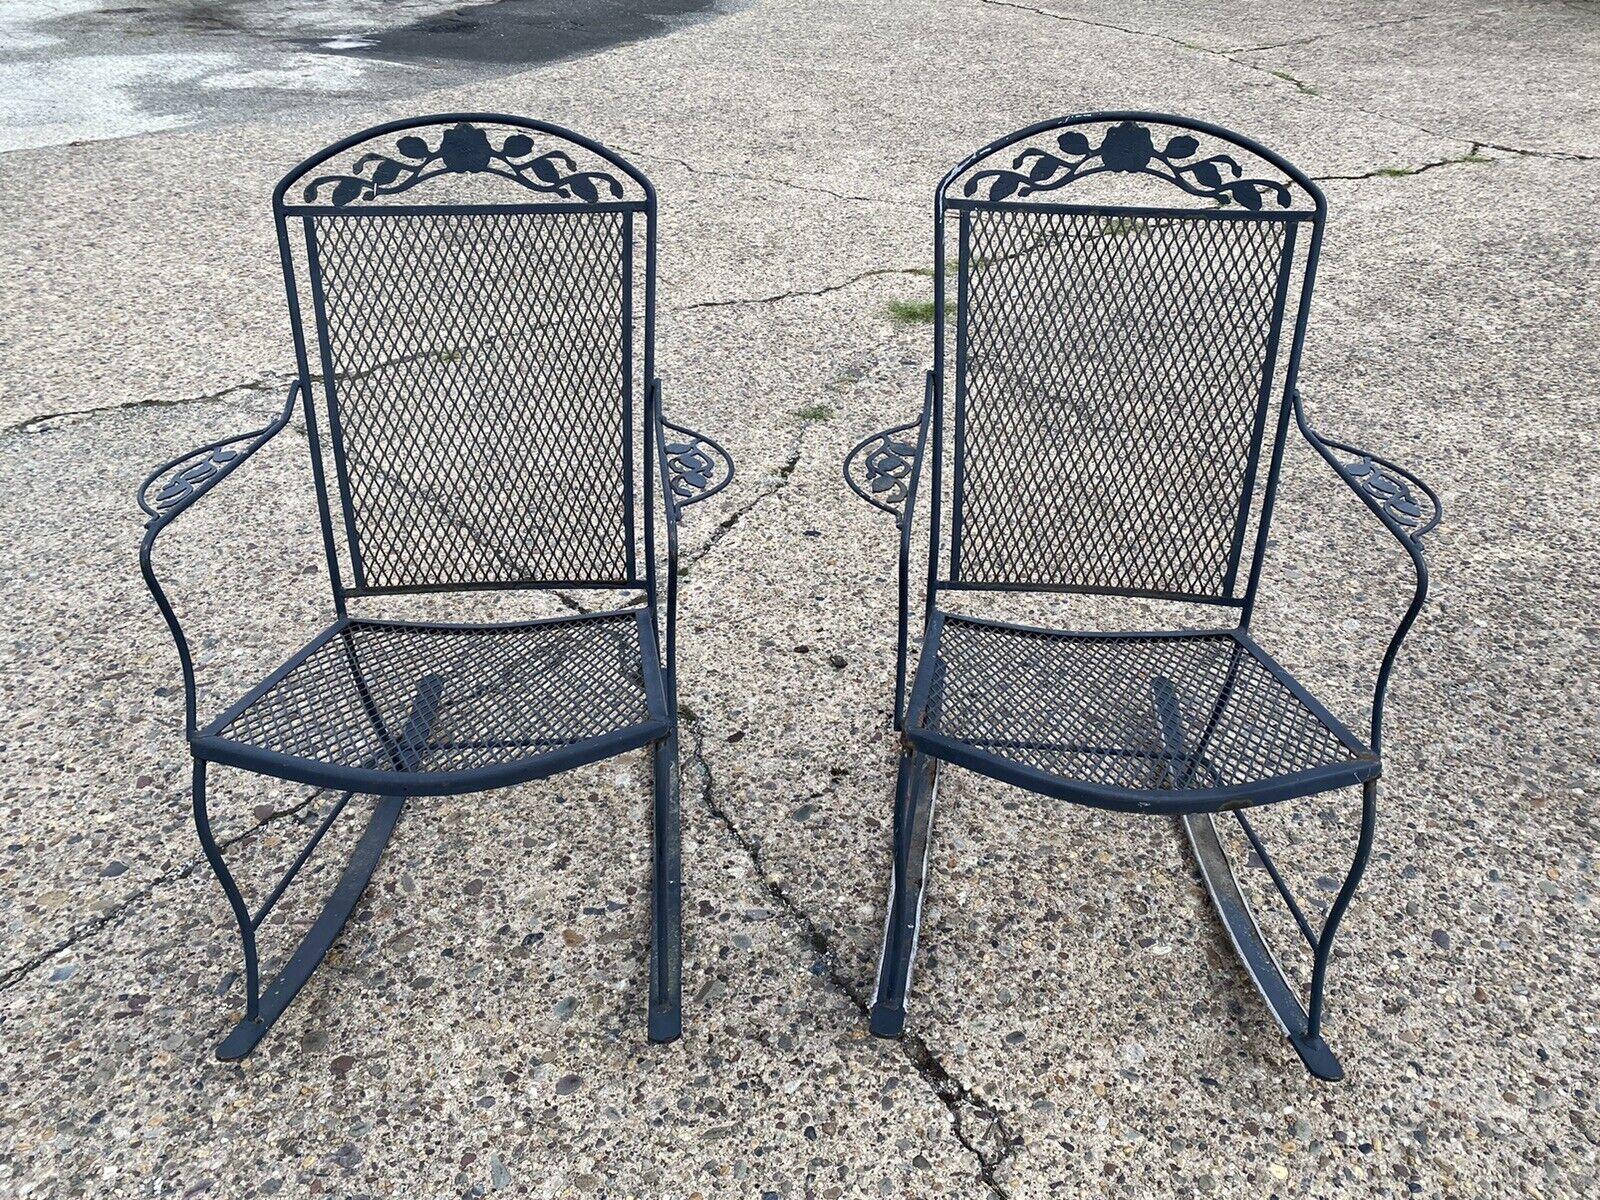 Vintage Wrought Iron Victorian Style Garden Patio Rocker Rocking Chairs - a Pair. Item features wrought iron construction, very nice vintage pair, great style and form, possibly Meadowcraft Dogwood pattern. Circa Mid to late 20th Century.